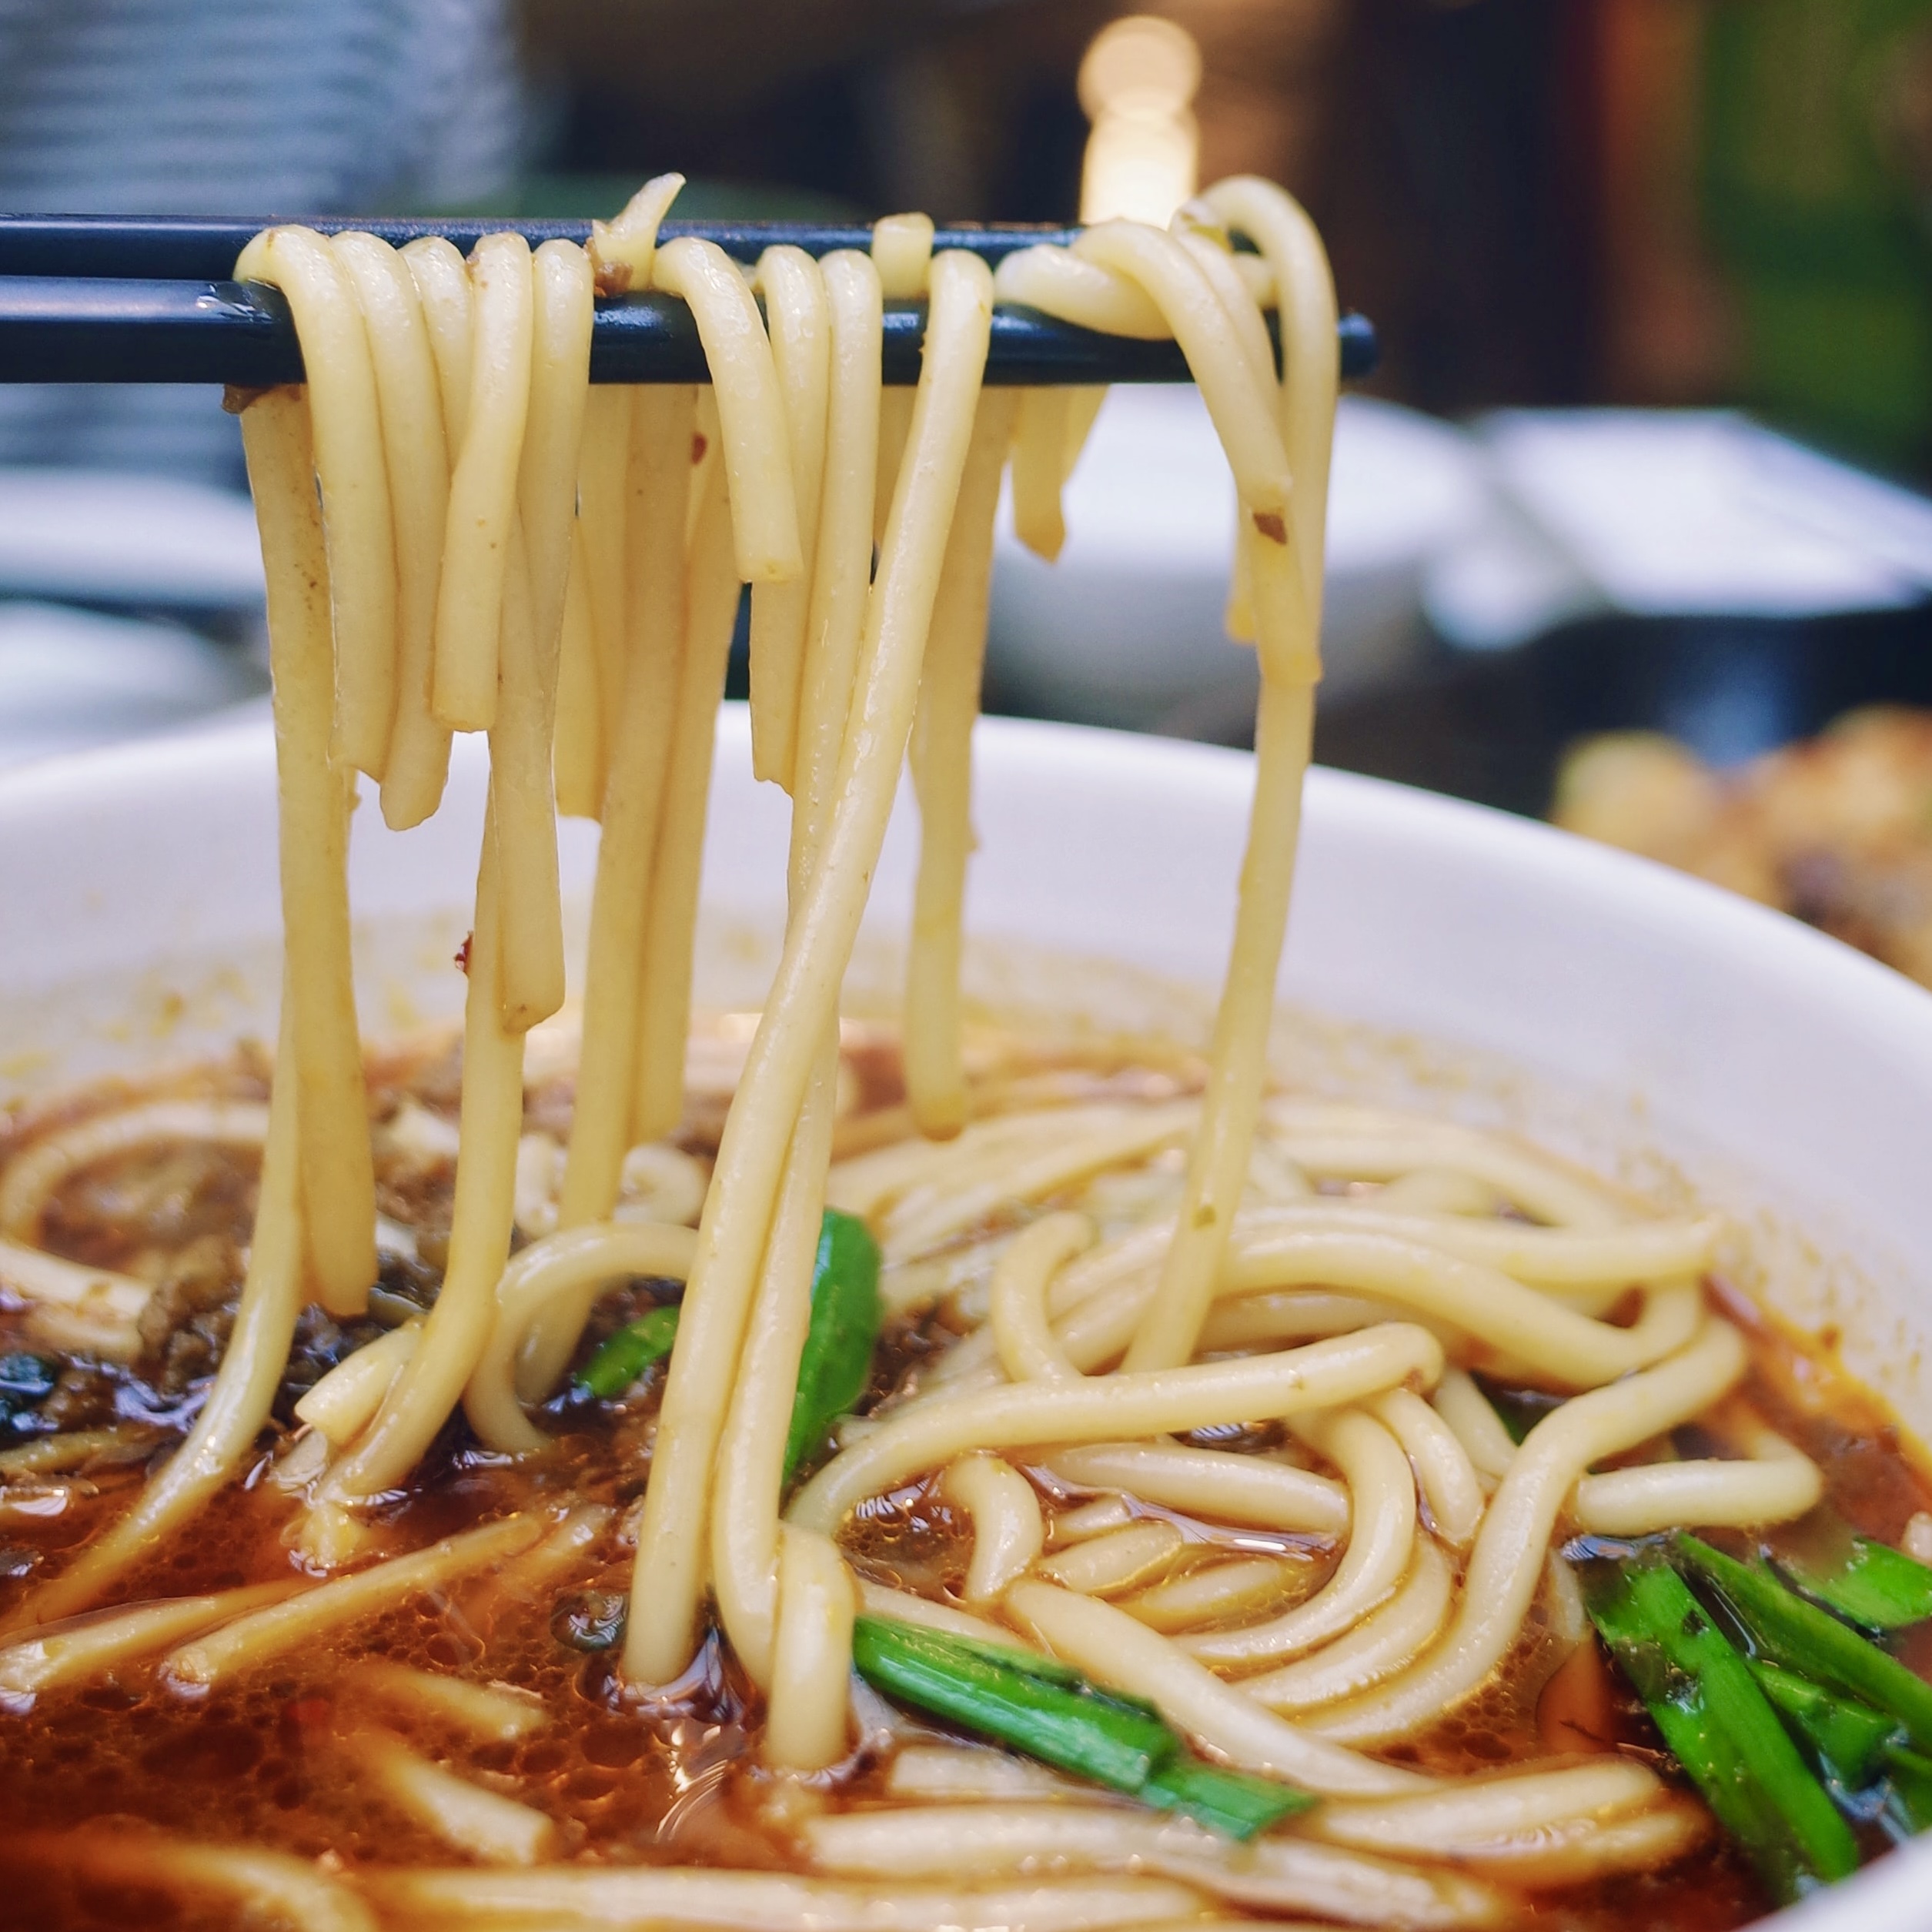 Image of noodles being picked up with chopsticks